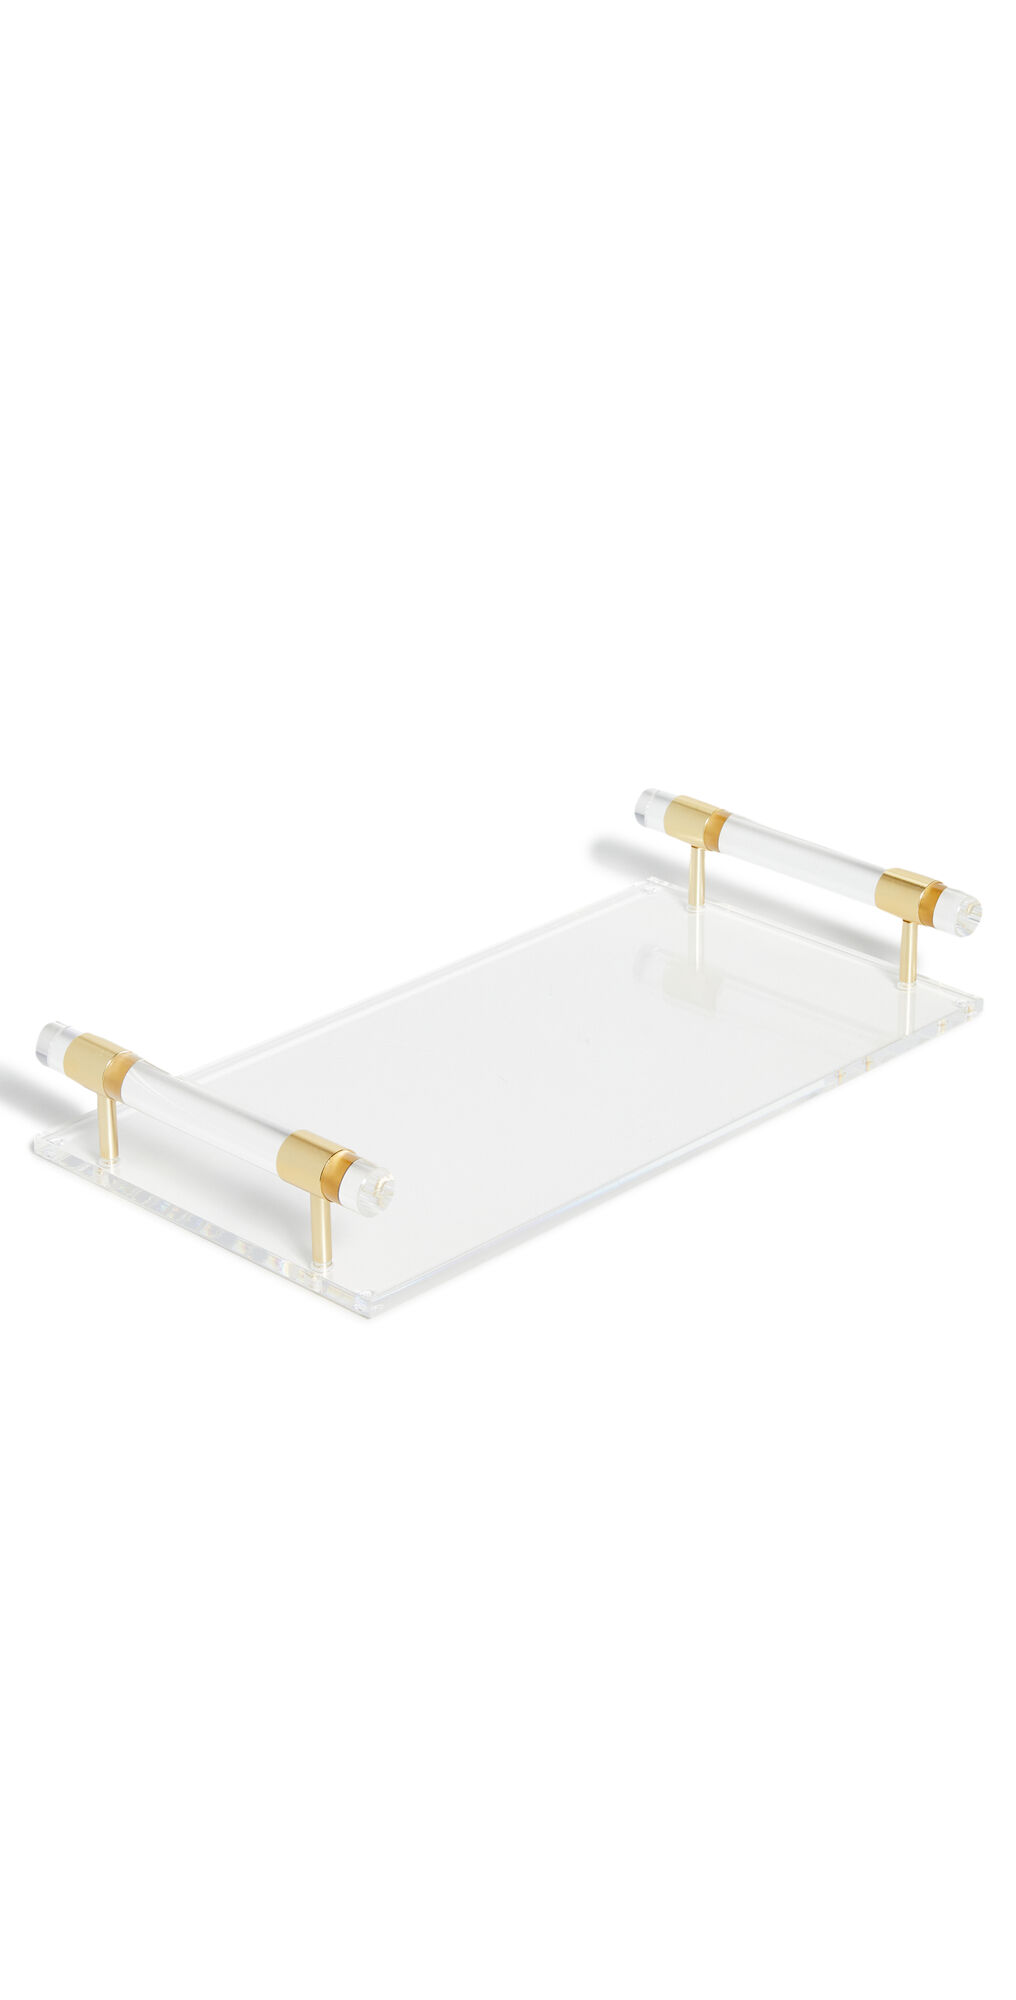 Shopbop Home Shopbop @Home Tizo Clear Lucite Tray Clear One Size    size: